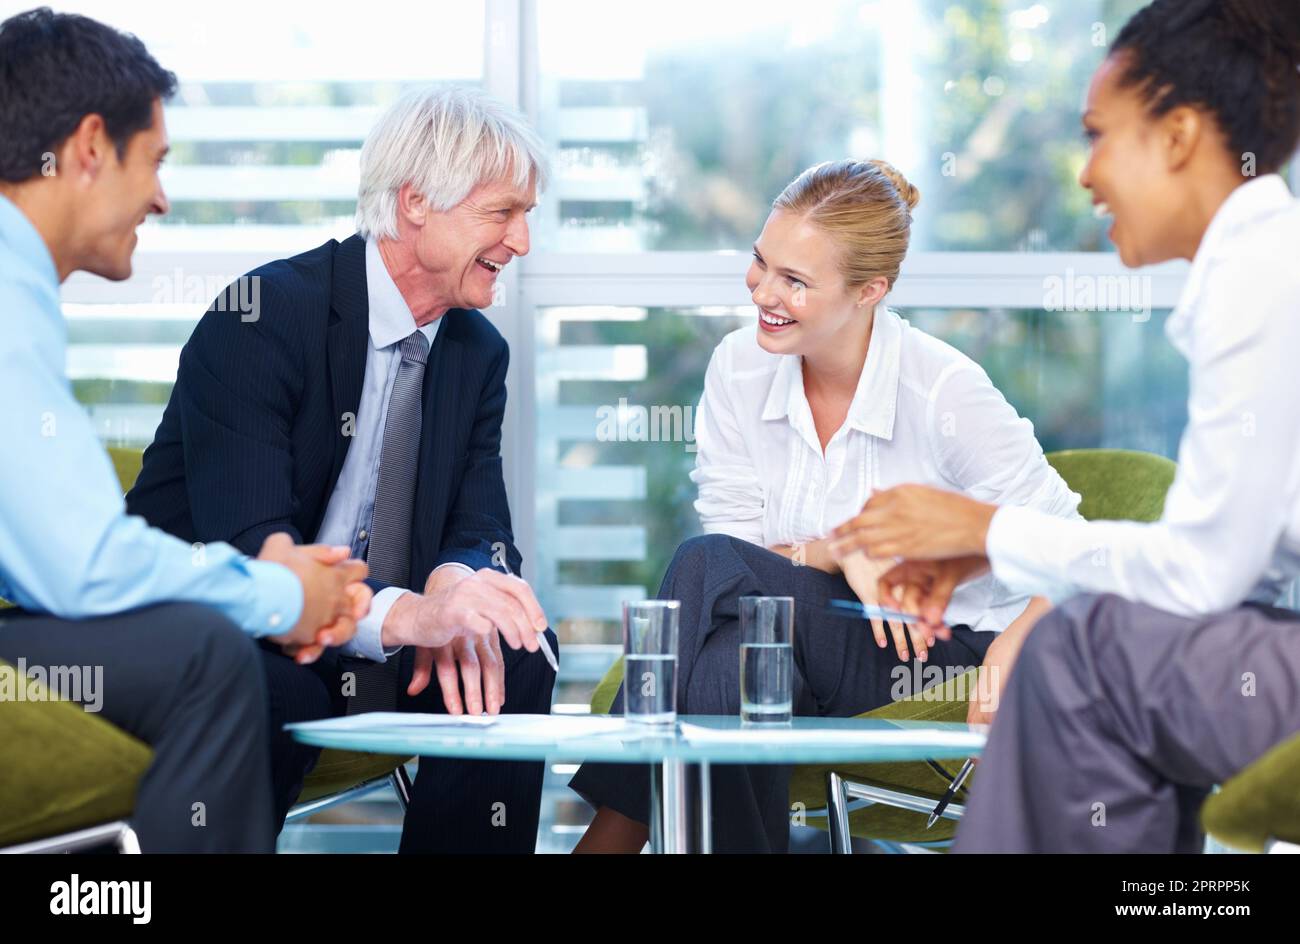 Business team in happy discussion. Portrait of multi ethnic business team having happy discussion at office. Stock Photo